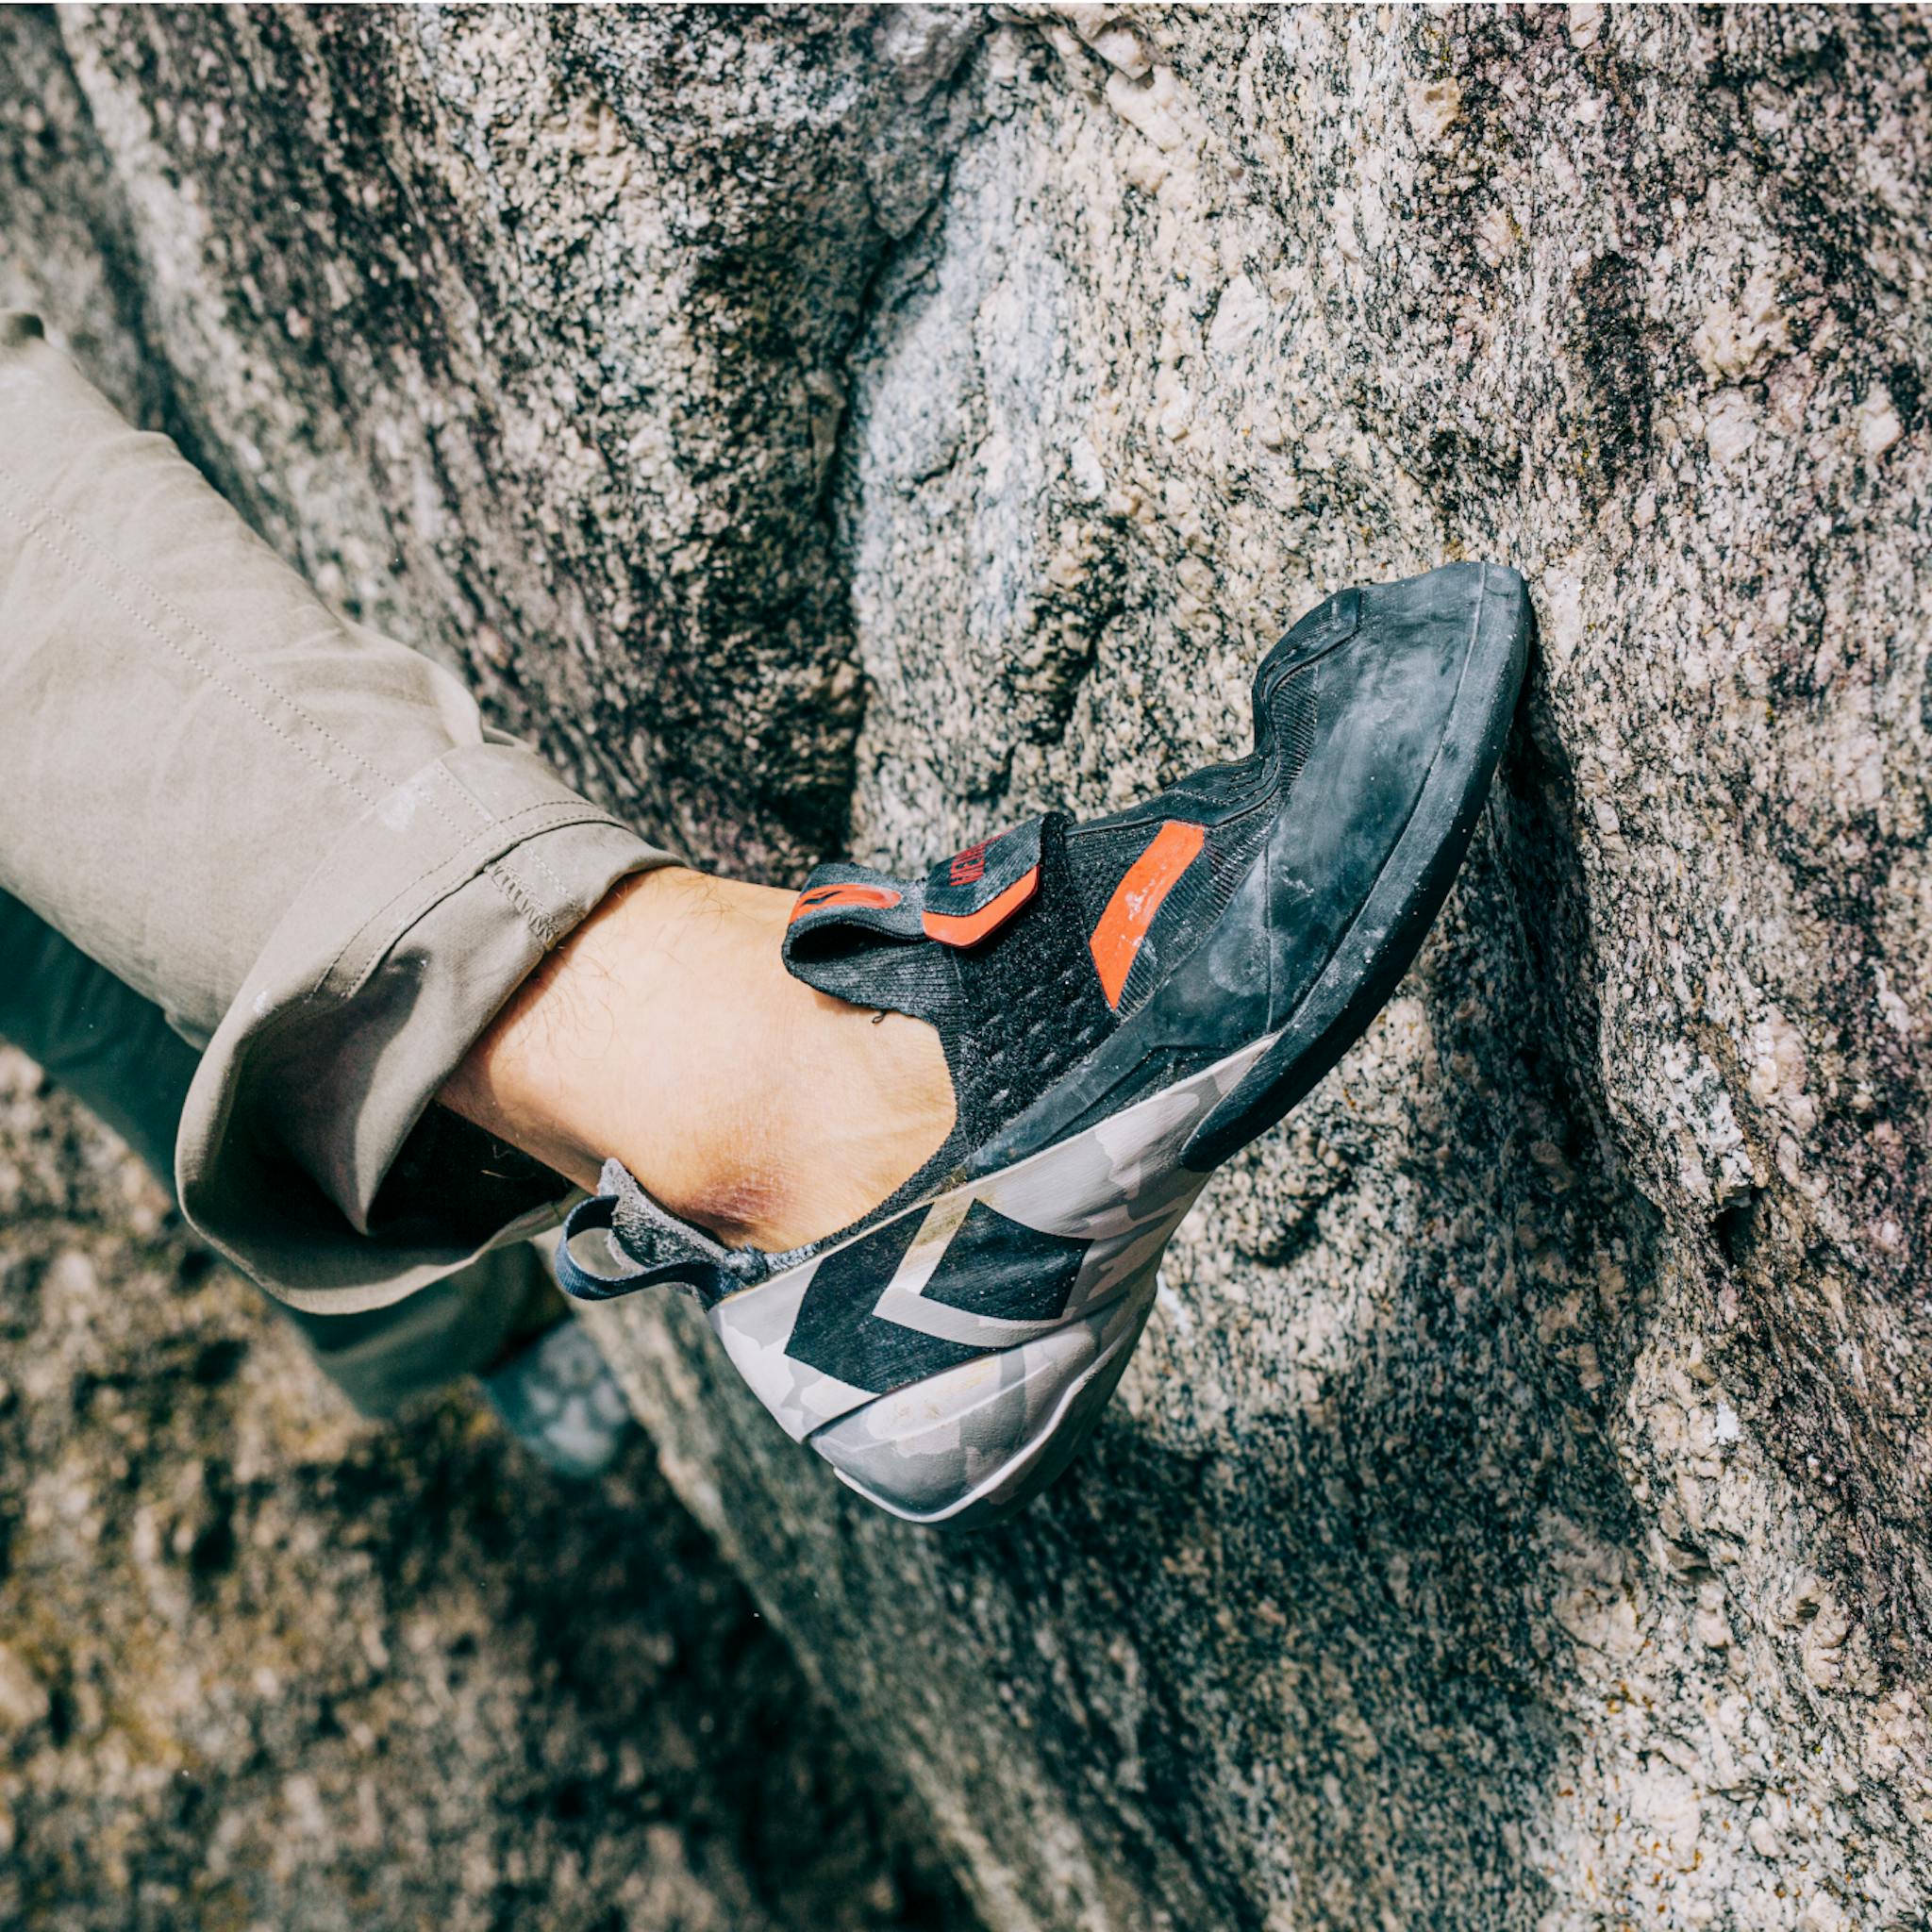 A climber smearing his Method S climbing shoe while bouldering.